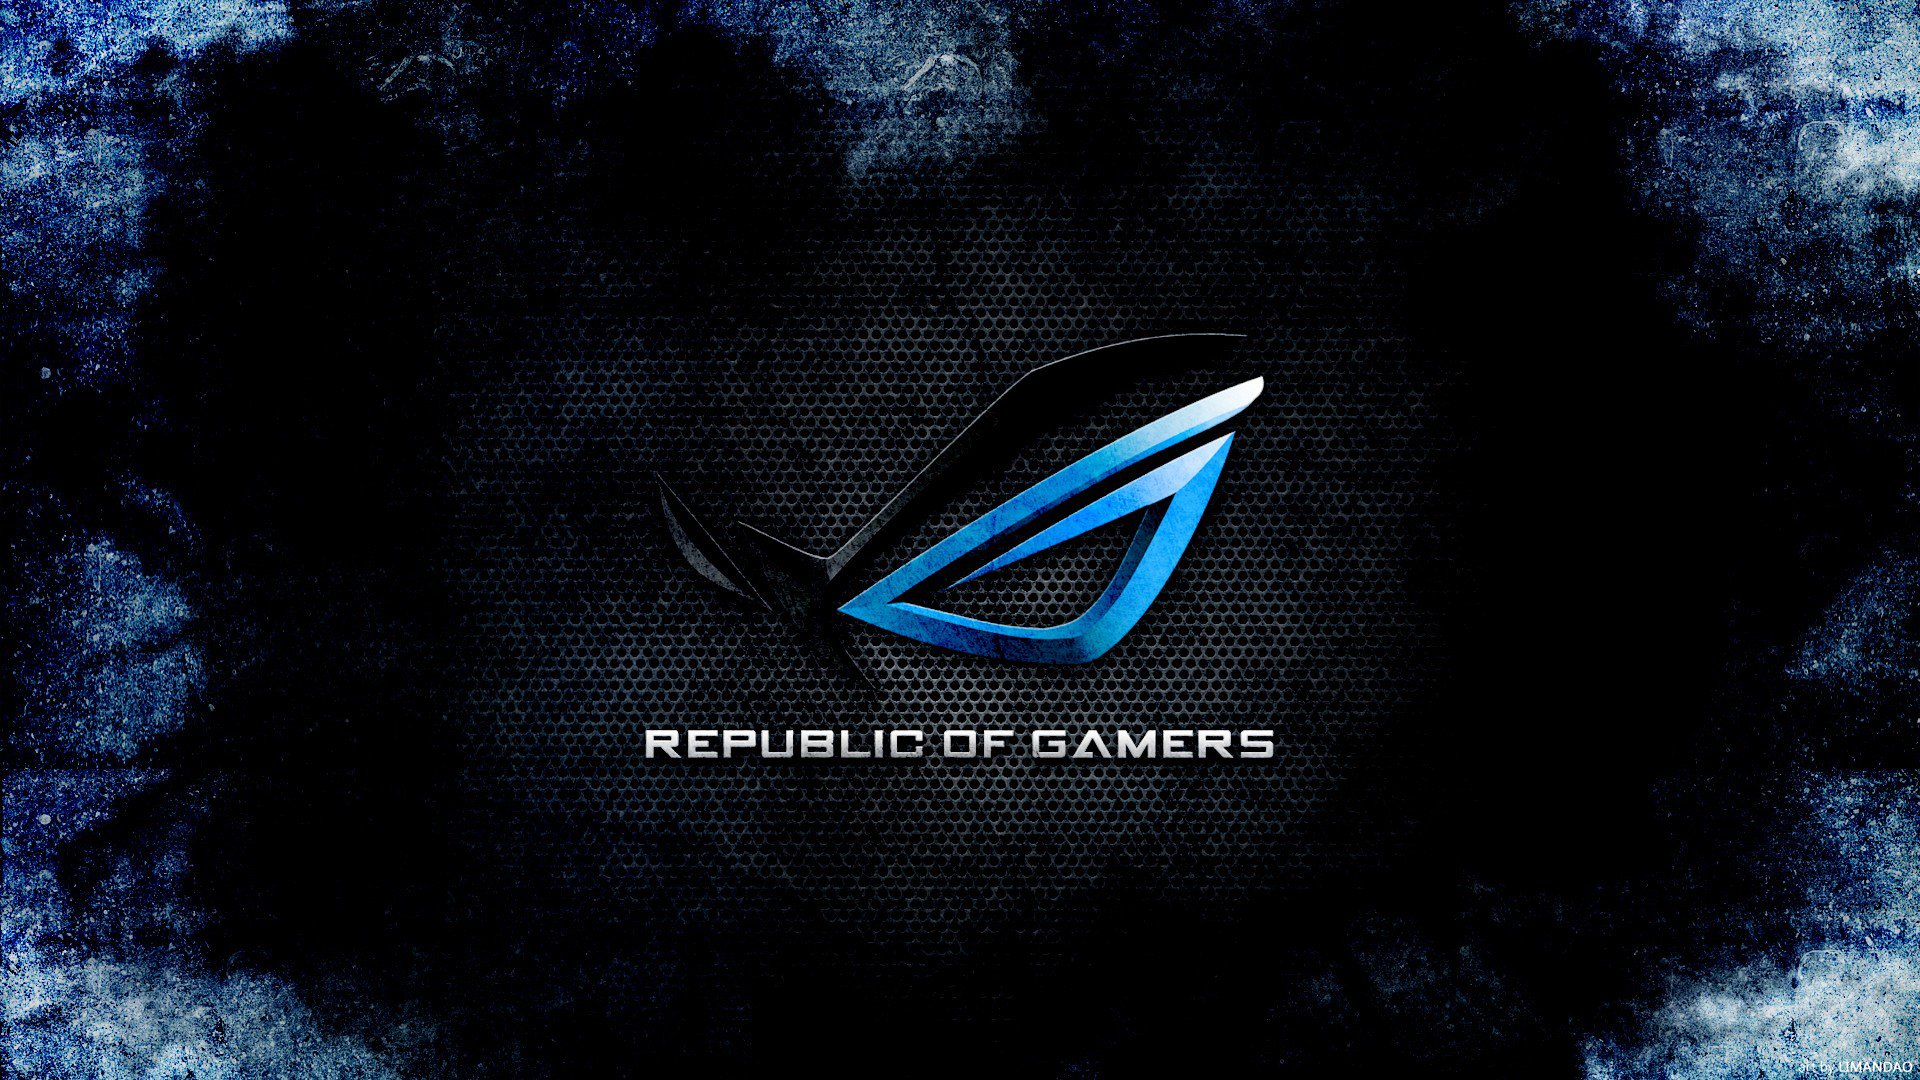 asus rog, republic of gamers, technology